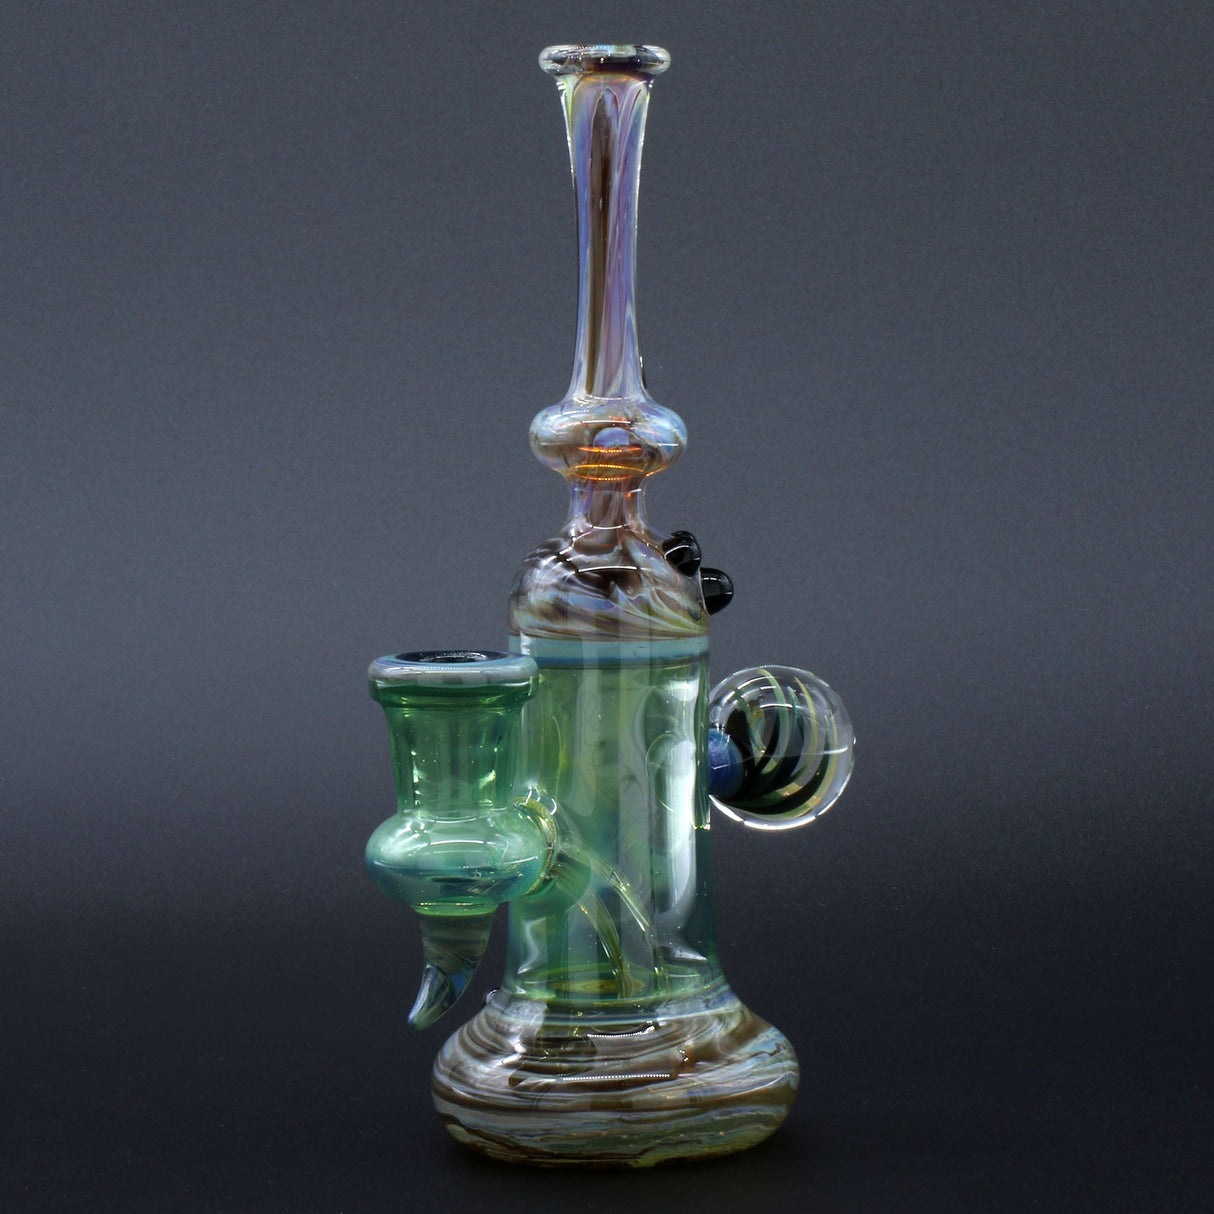 Clayball Glass "Enclave Nebula" Heady Sherlock Dab-Rig with intricate design, front view on a dark background